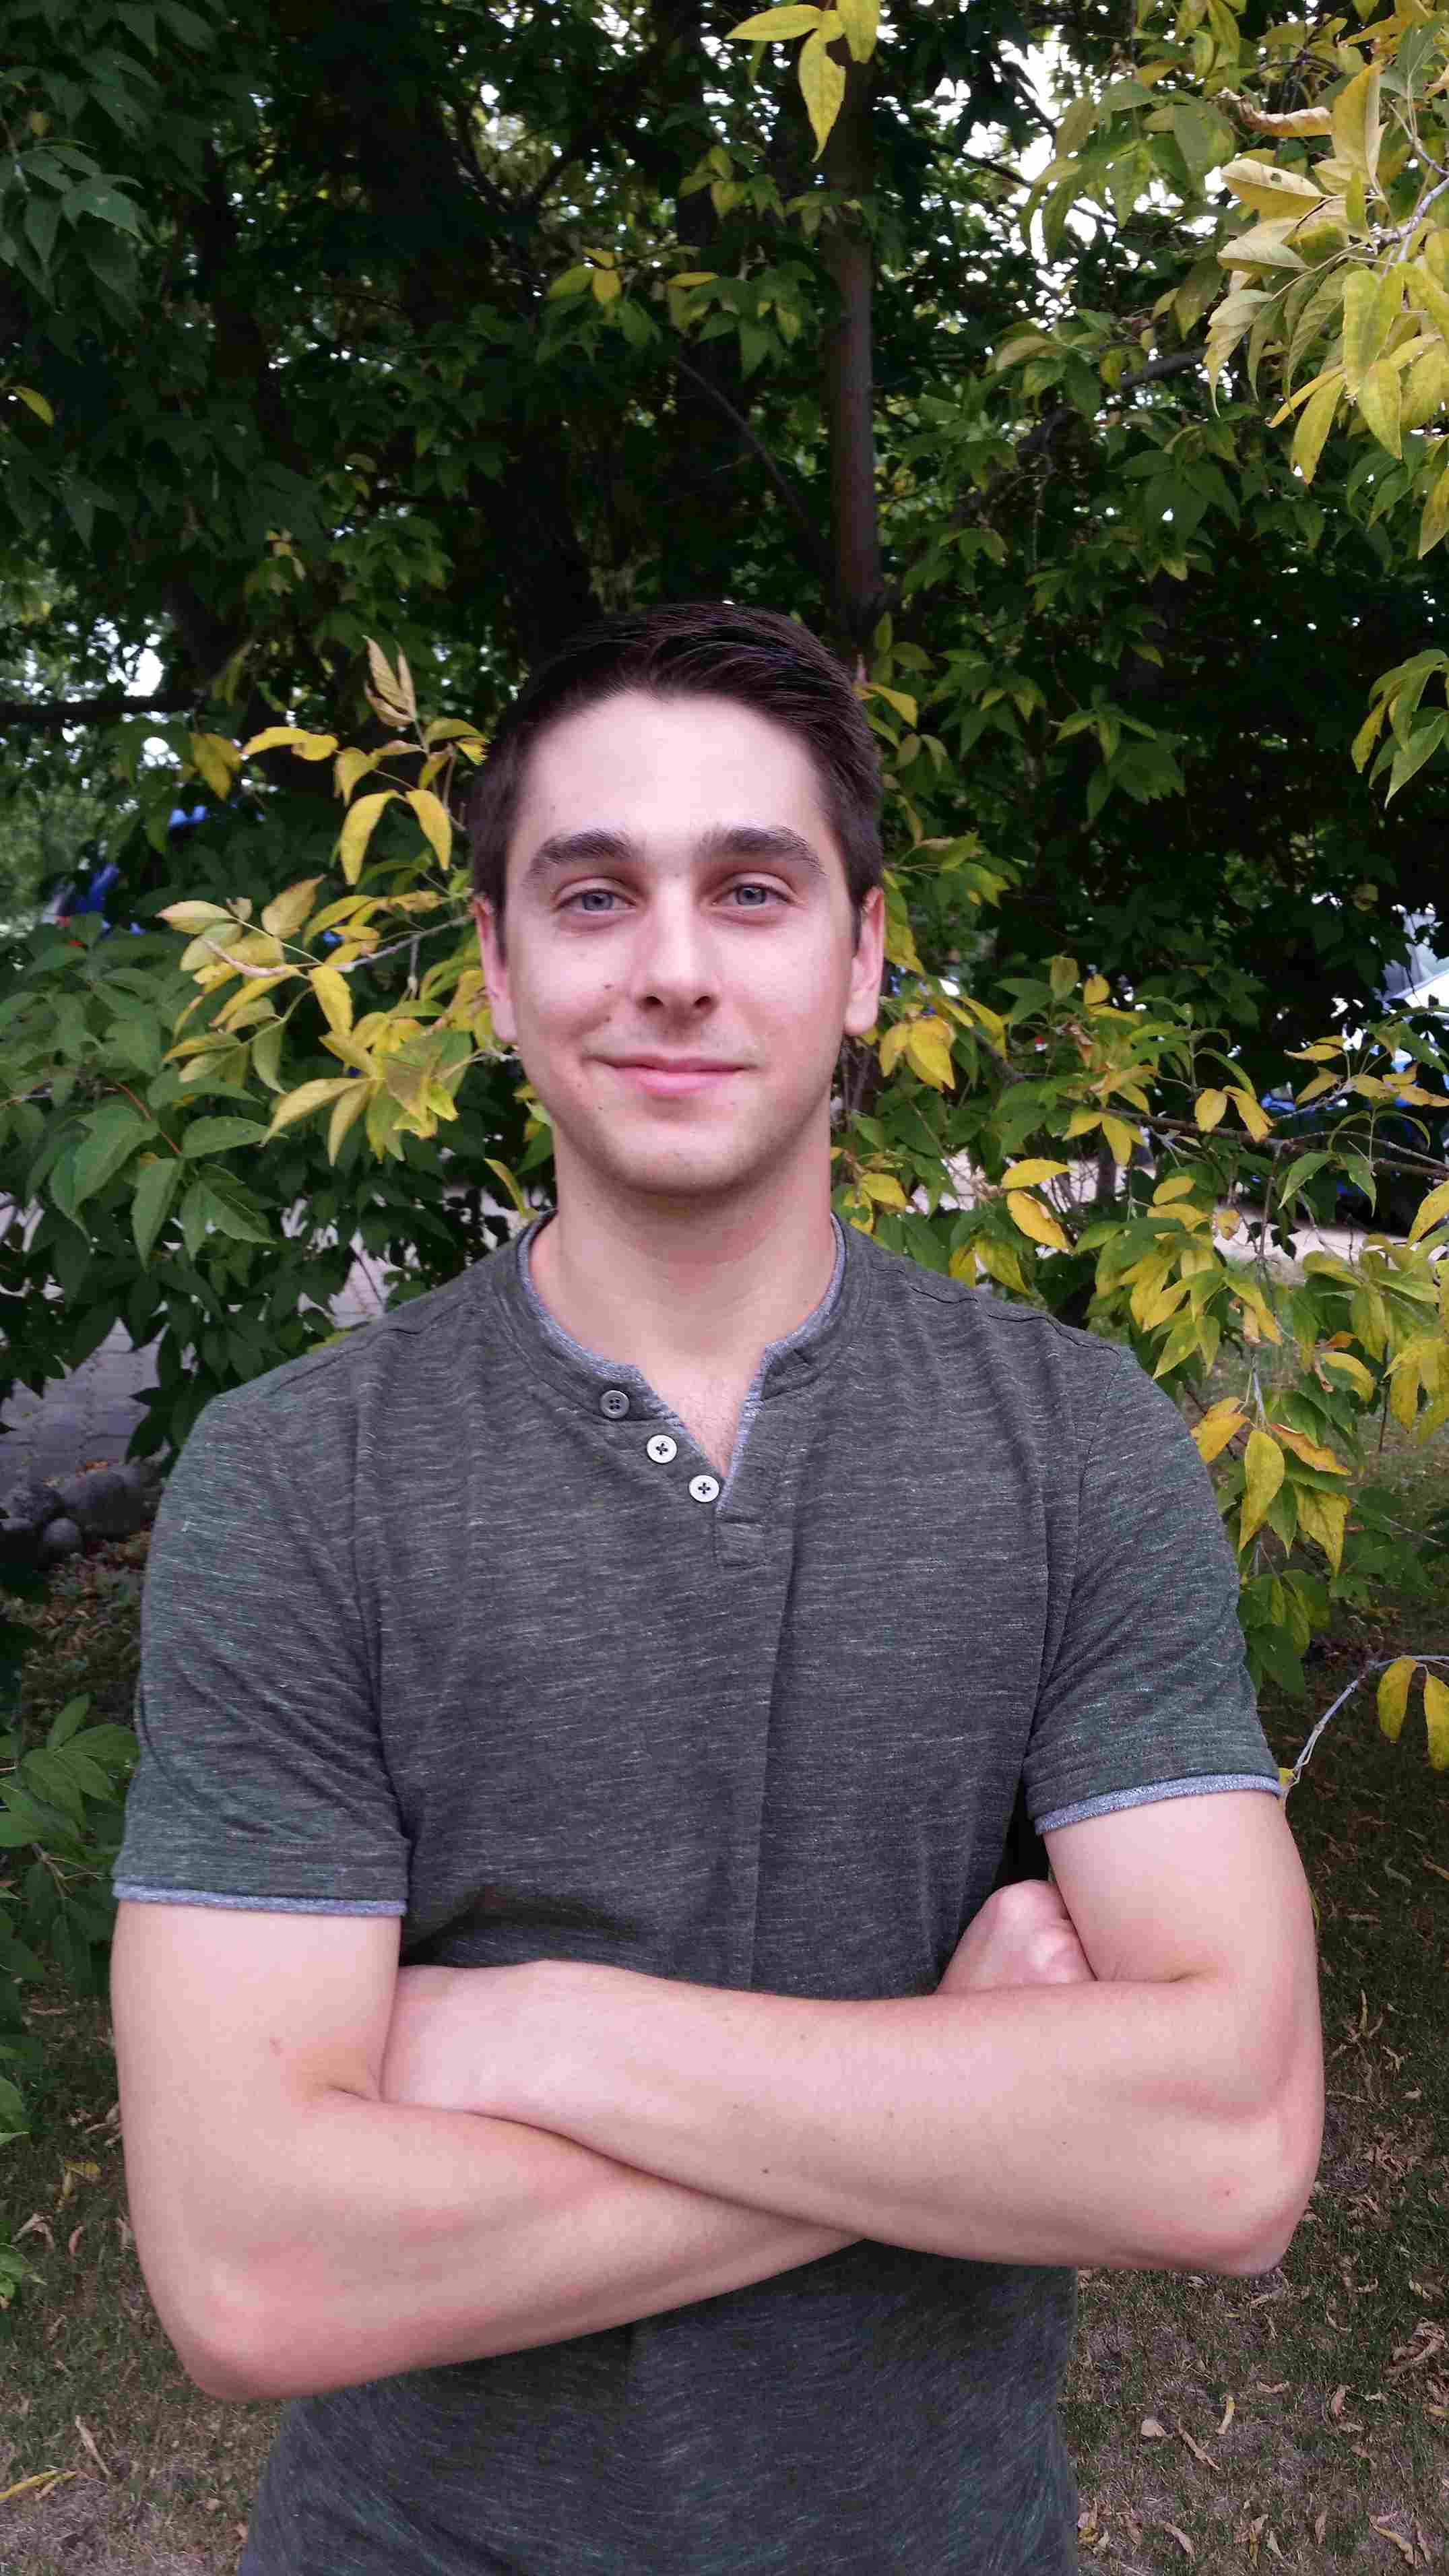 Graduate Student Wr riting Mentor Blake Carter. He is standing in front of a leafy tree, wearing a grey t-shirt. He is smiling and his arms are crossed.